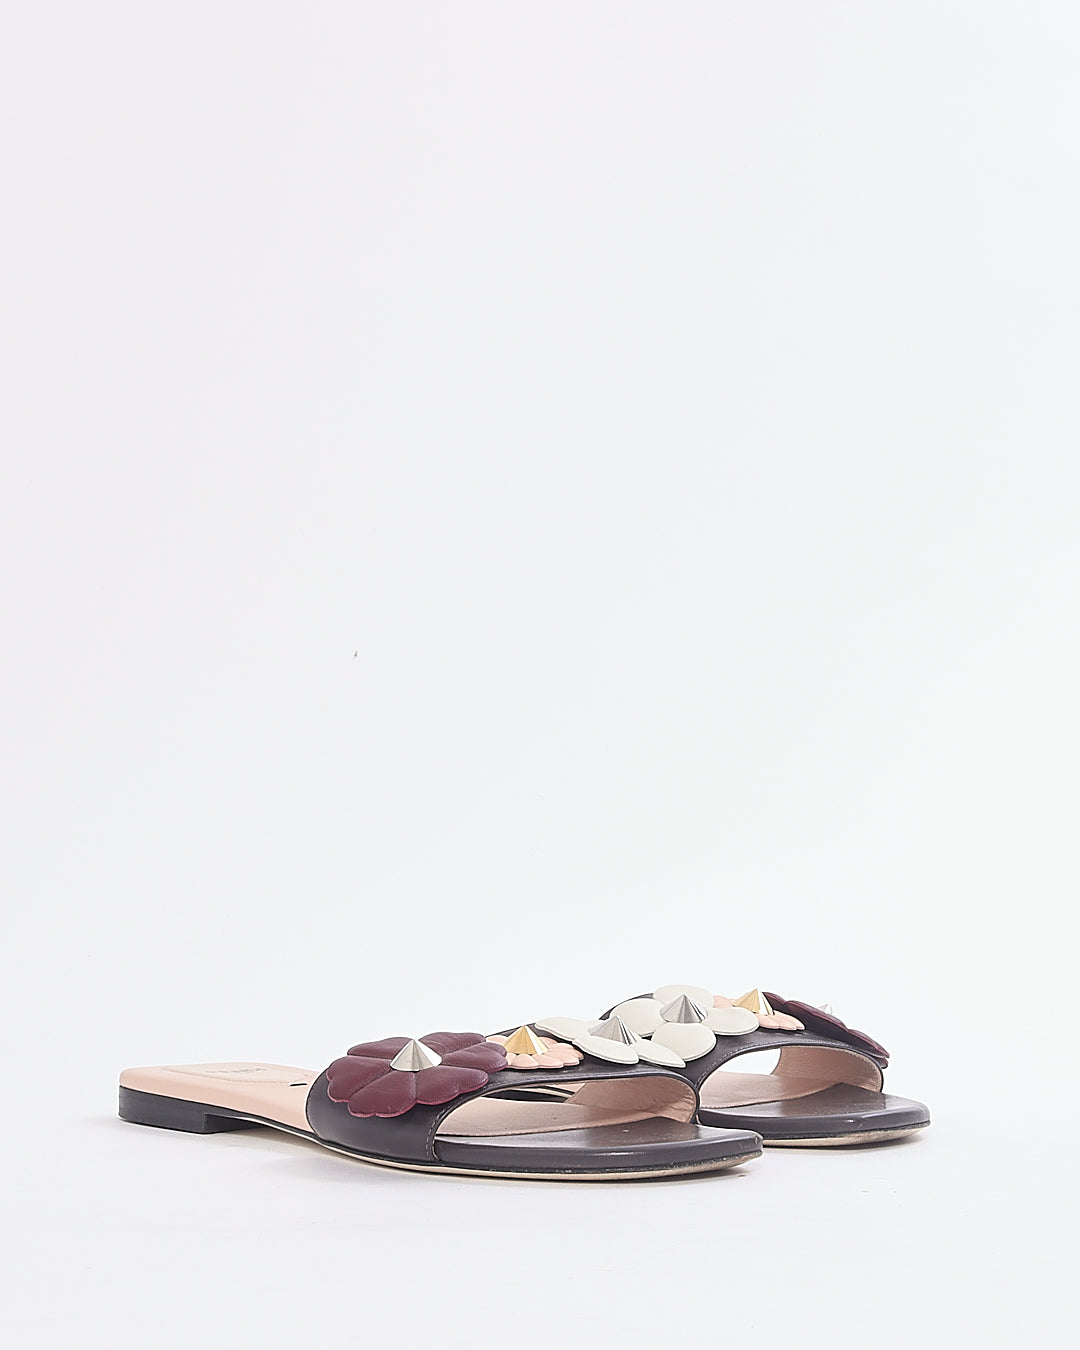 Fendi Grey Multi Floral Cut Out Accent Sandals - 38 BOUGHT AT COST